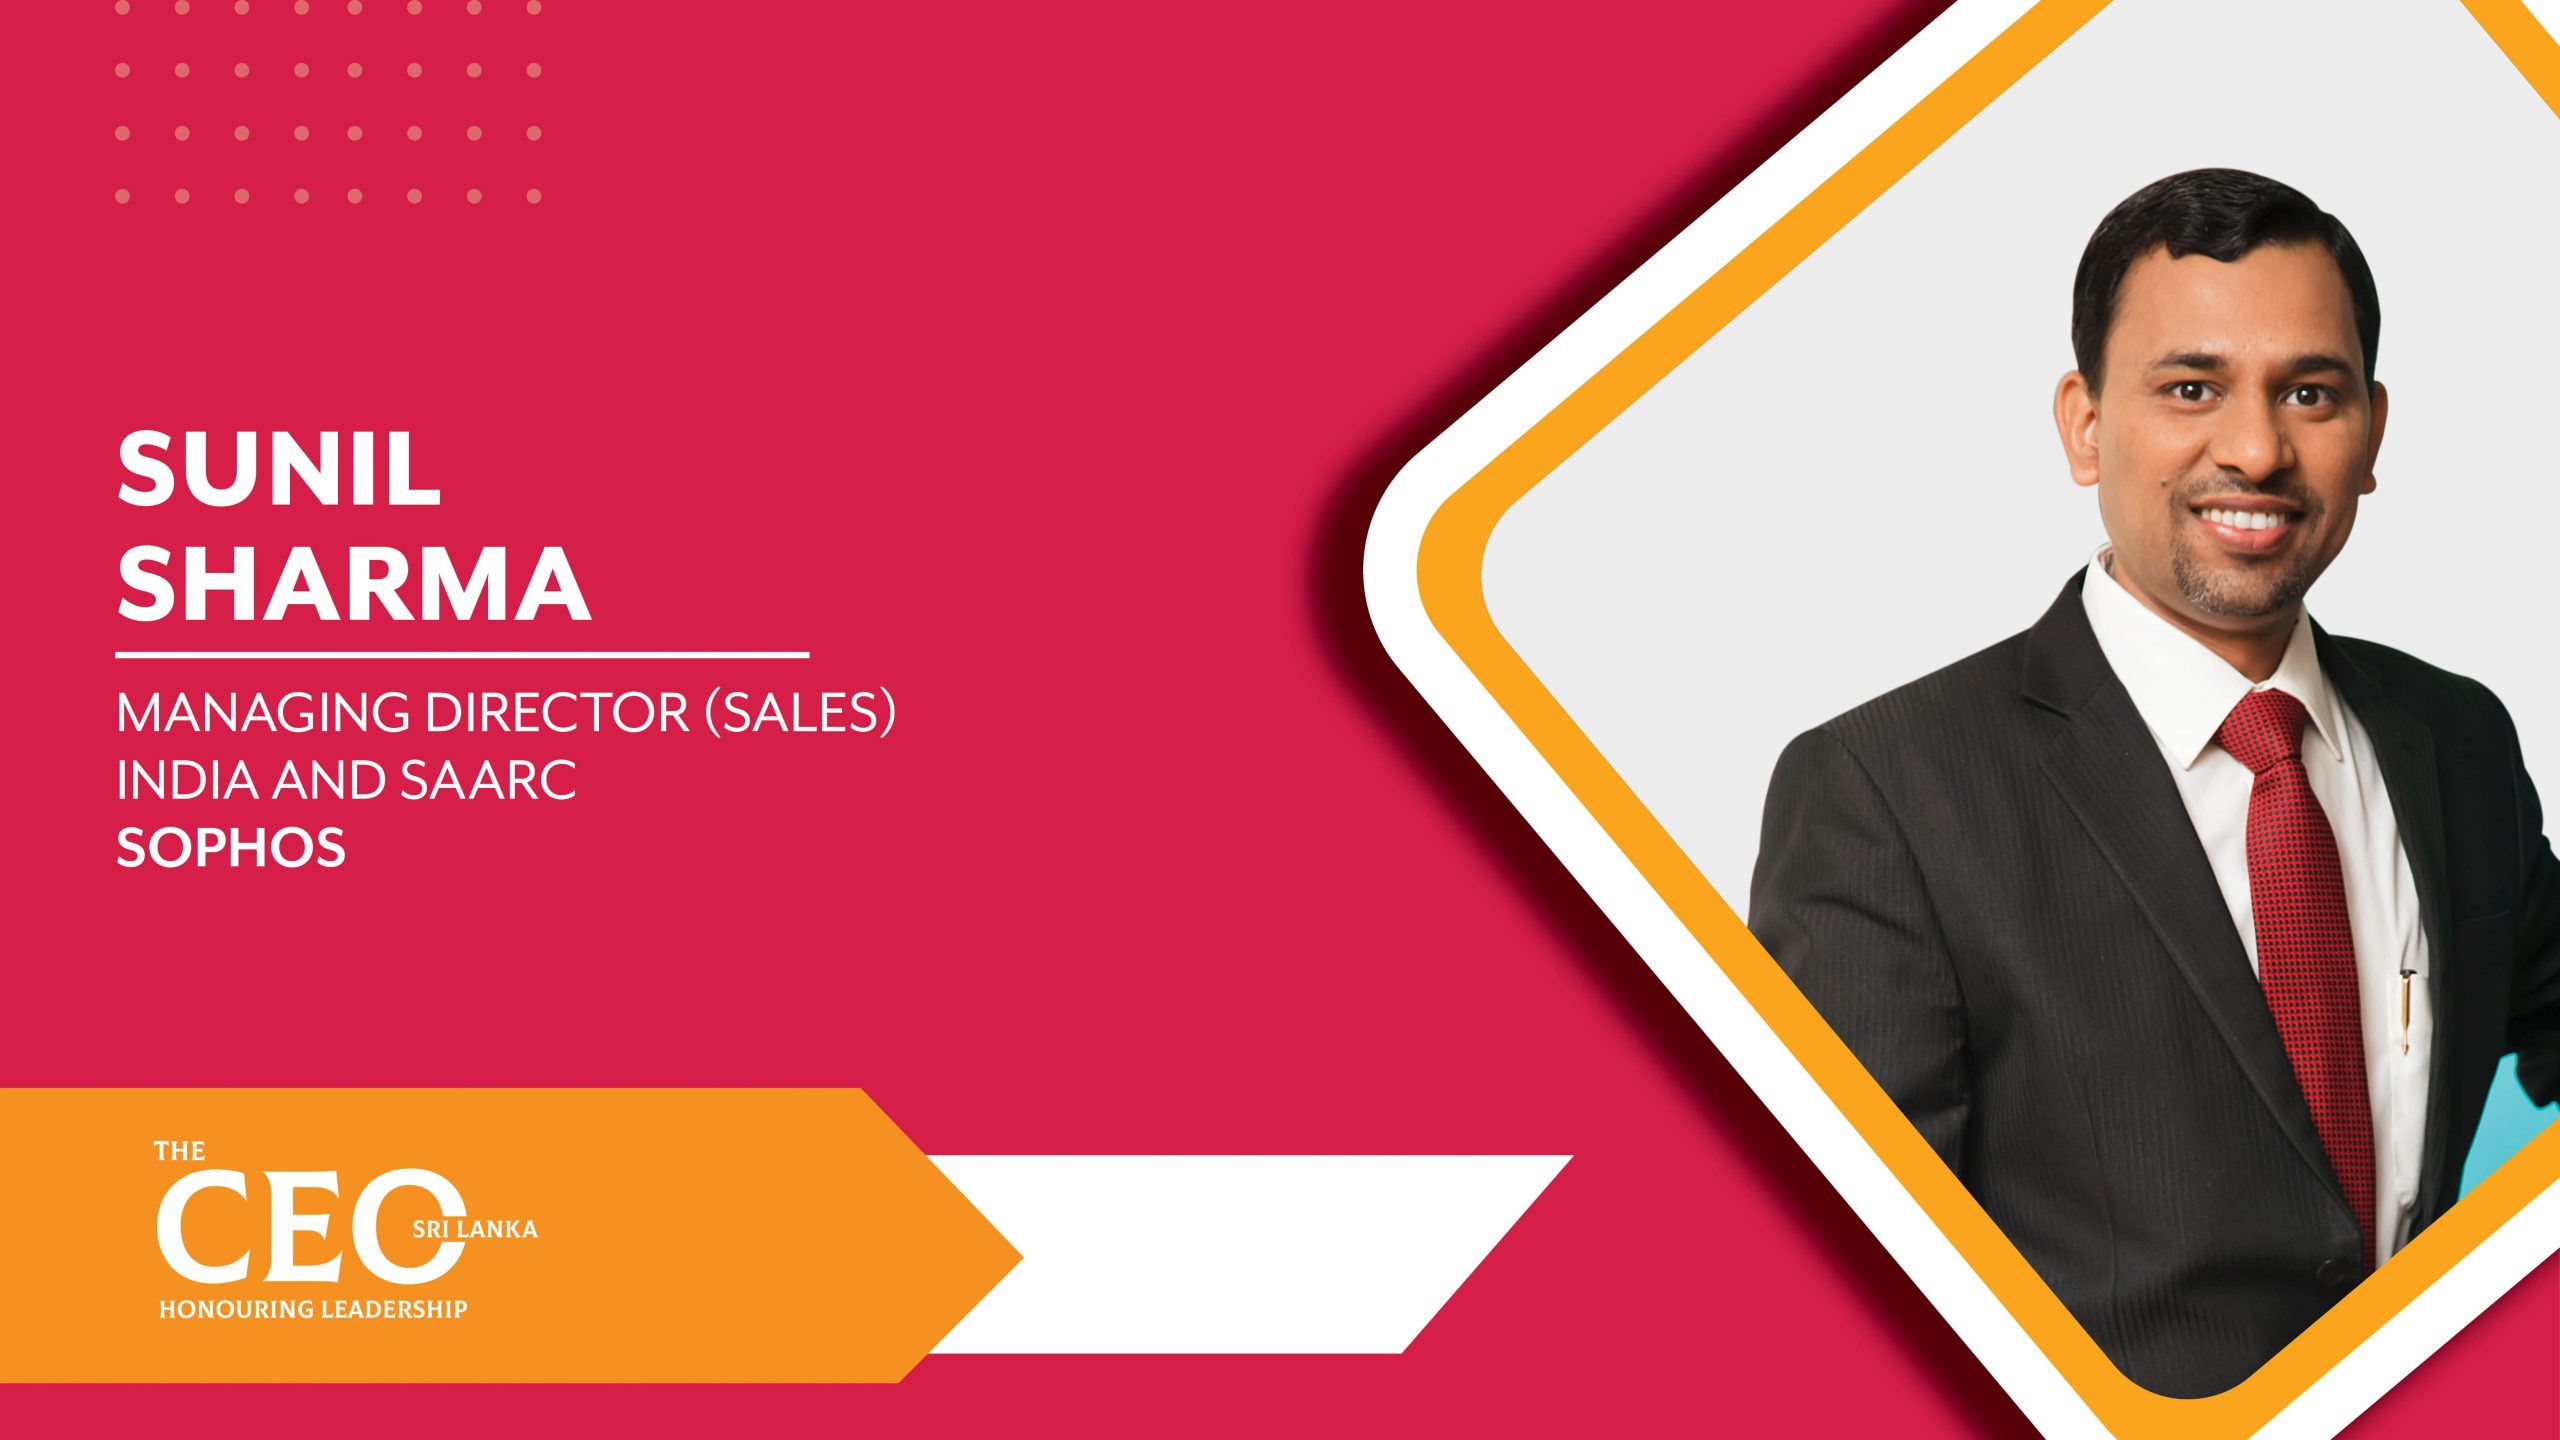 Actively Encrypting the World – Managing Director (Sales) India and SAARC of Sophos, Sunil Sharma